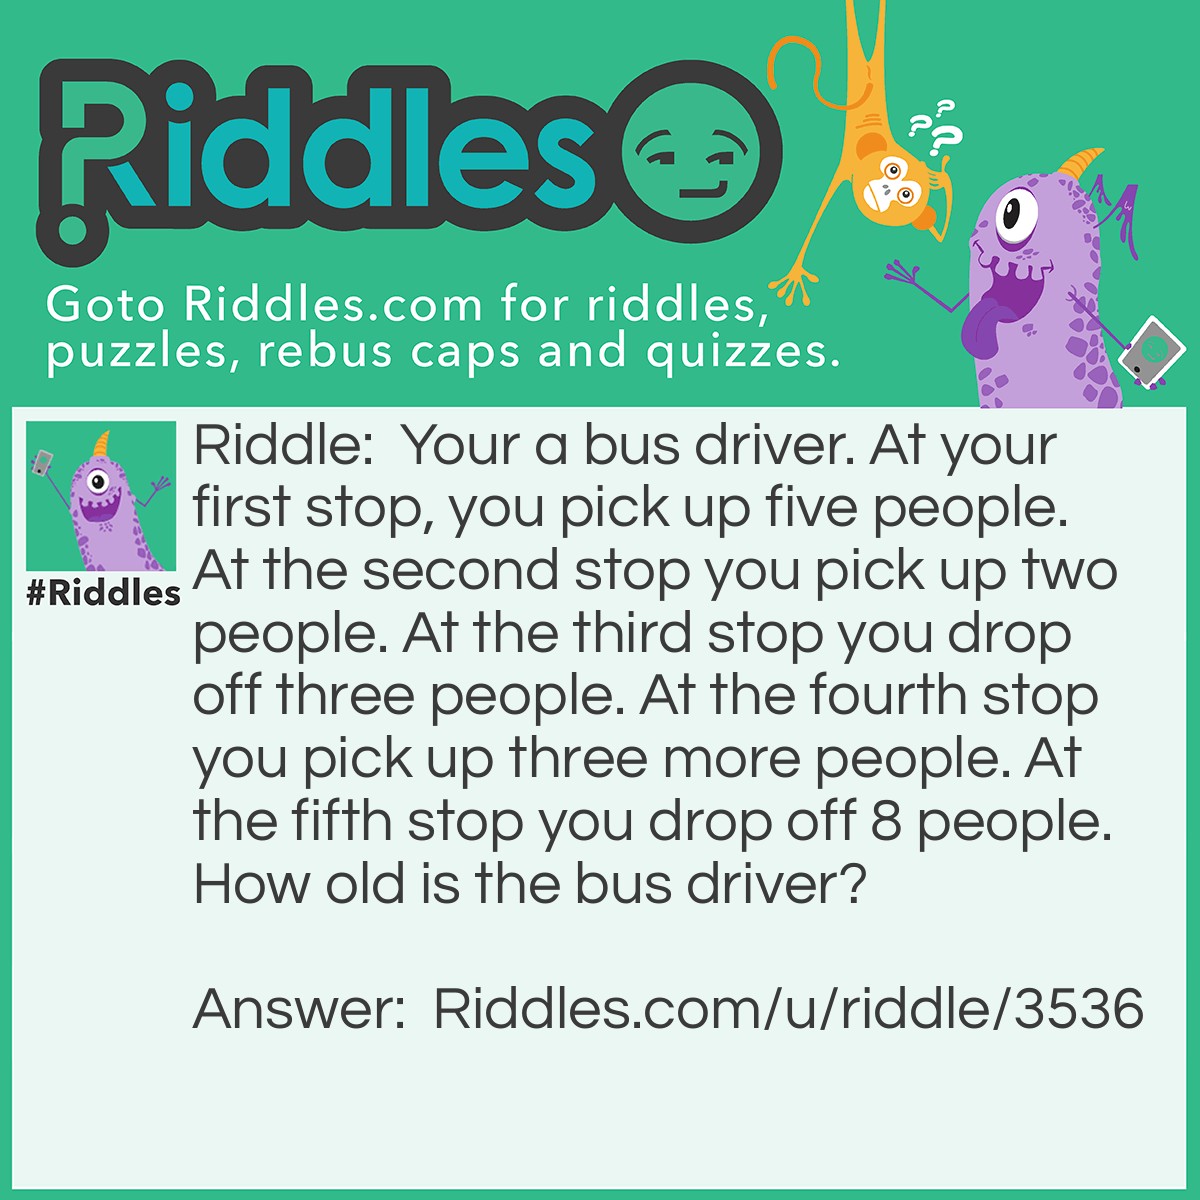 Riddle: Your a bus driver. At your first stop, you pick up five people. At the second stop you pick up two people. At the third stop you drop off three people. At the fourth stop you pick up three more people. At the fifth stop you drop off 8 people. How old is the bus driver? Answer: Your the bus driver so he is your age.